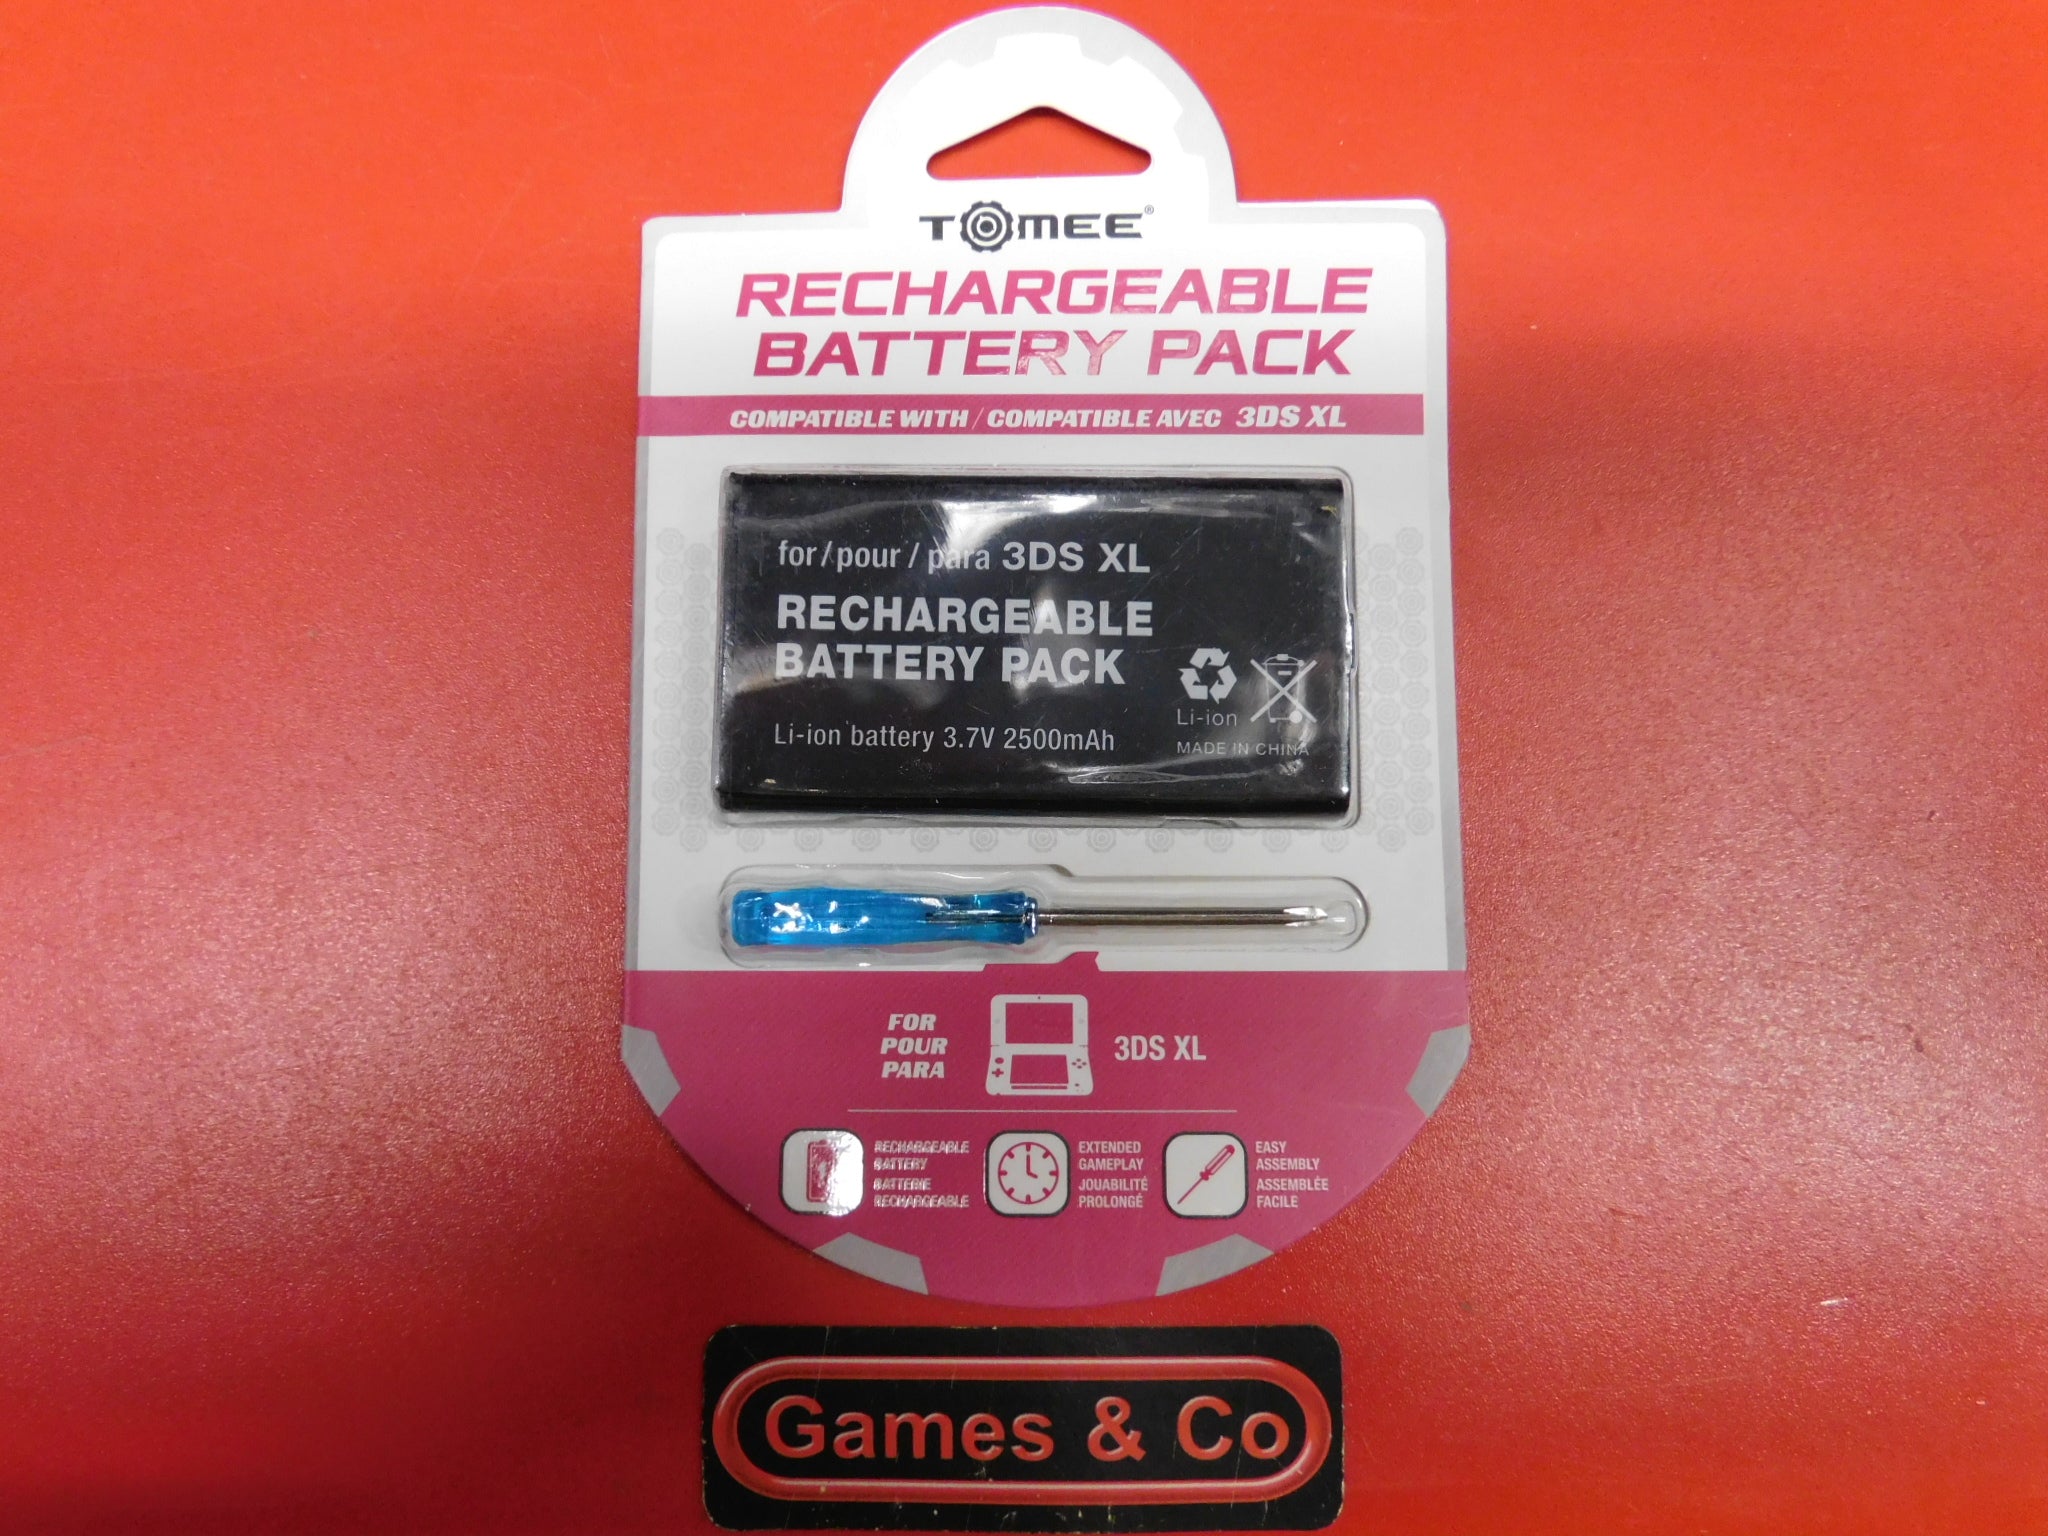 RECHARGEABLE BATTERY PACK 3DS XL